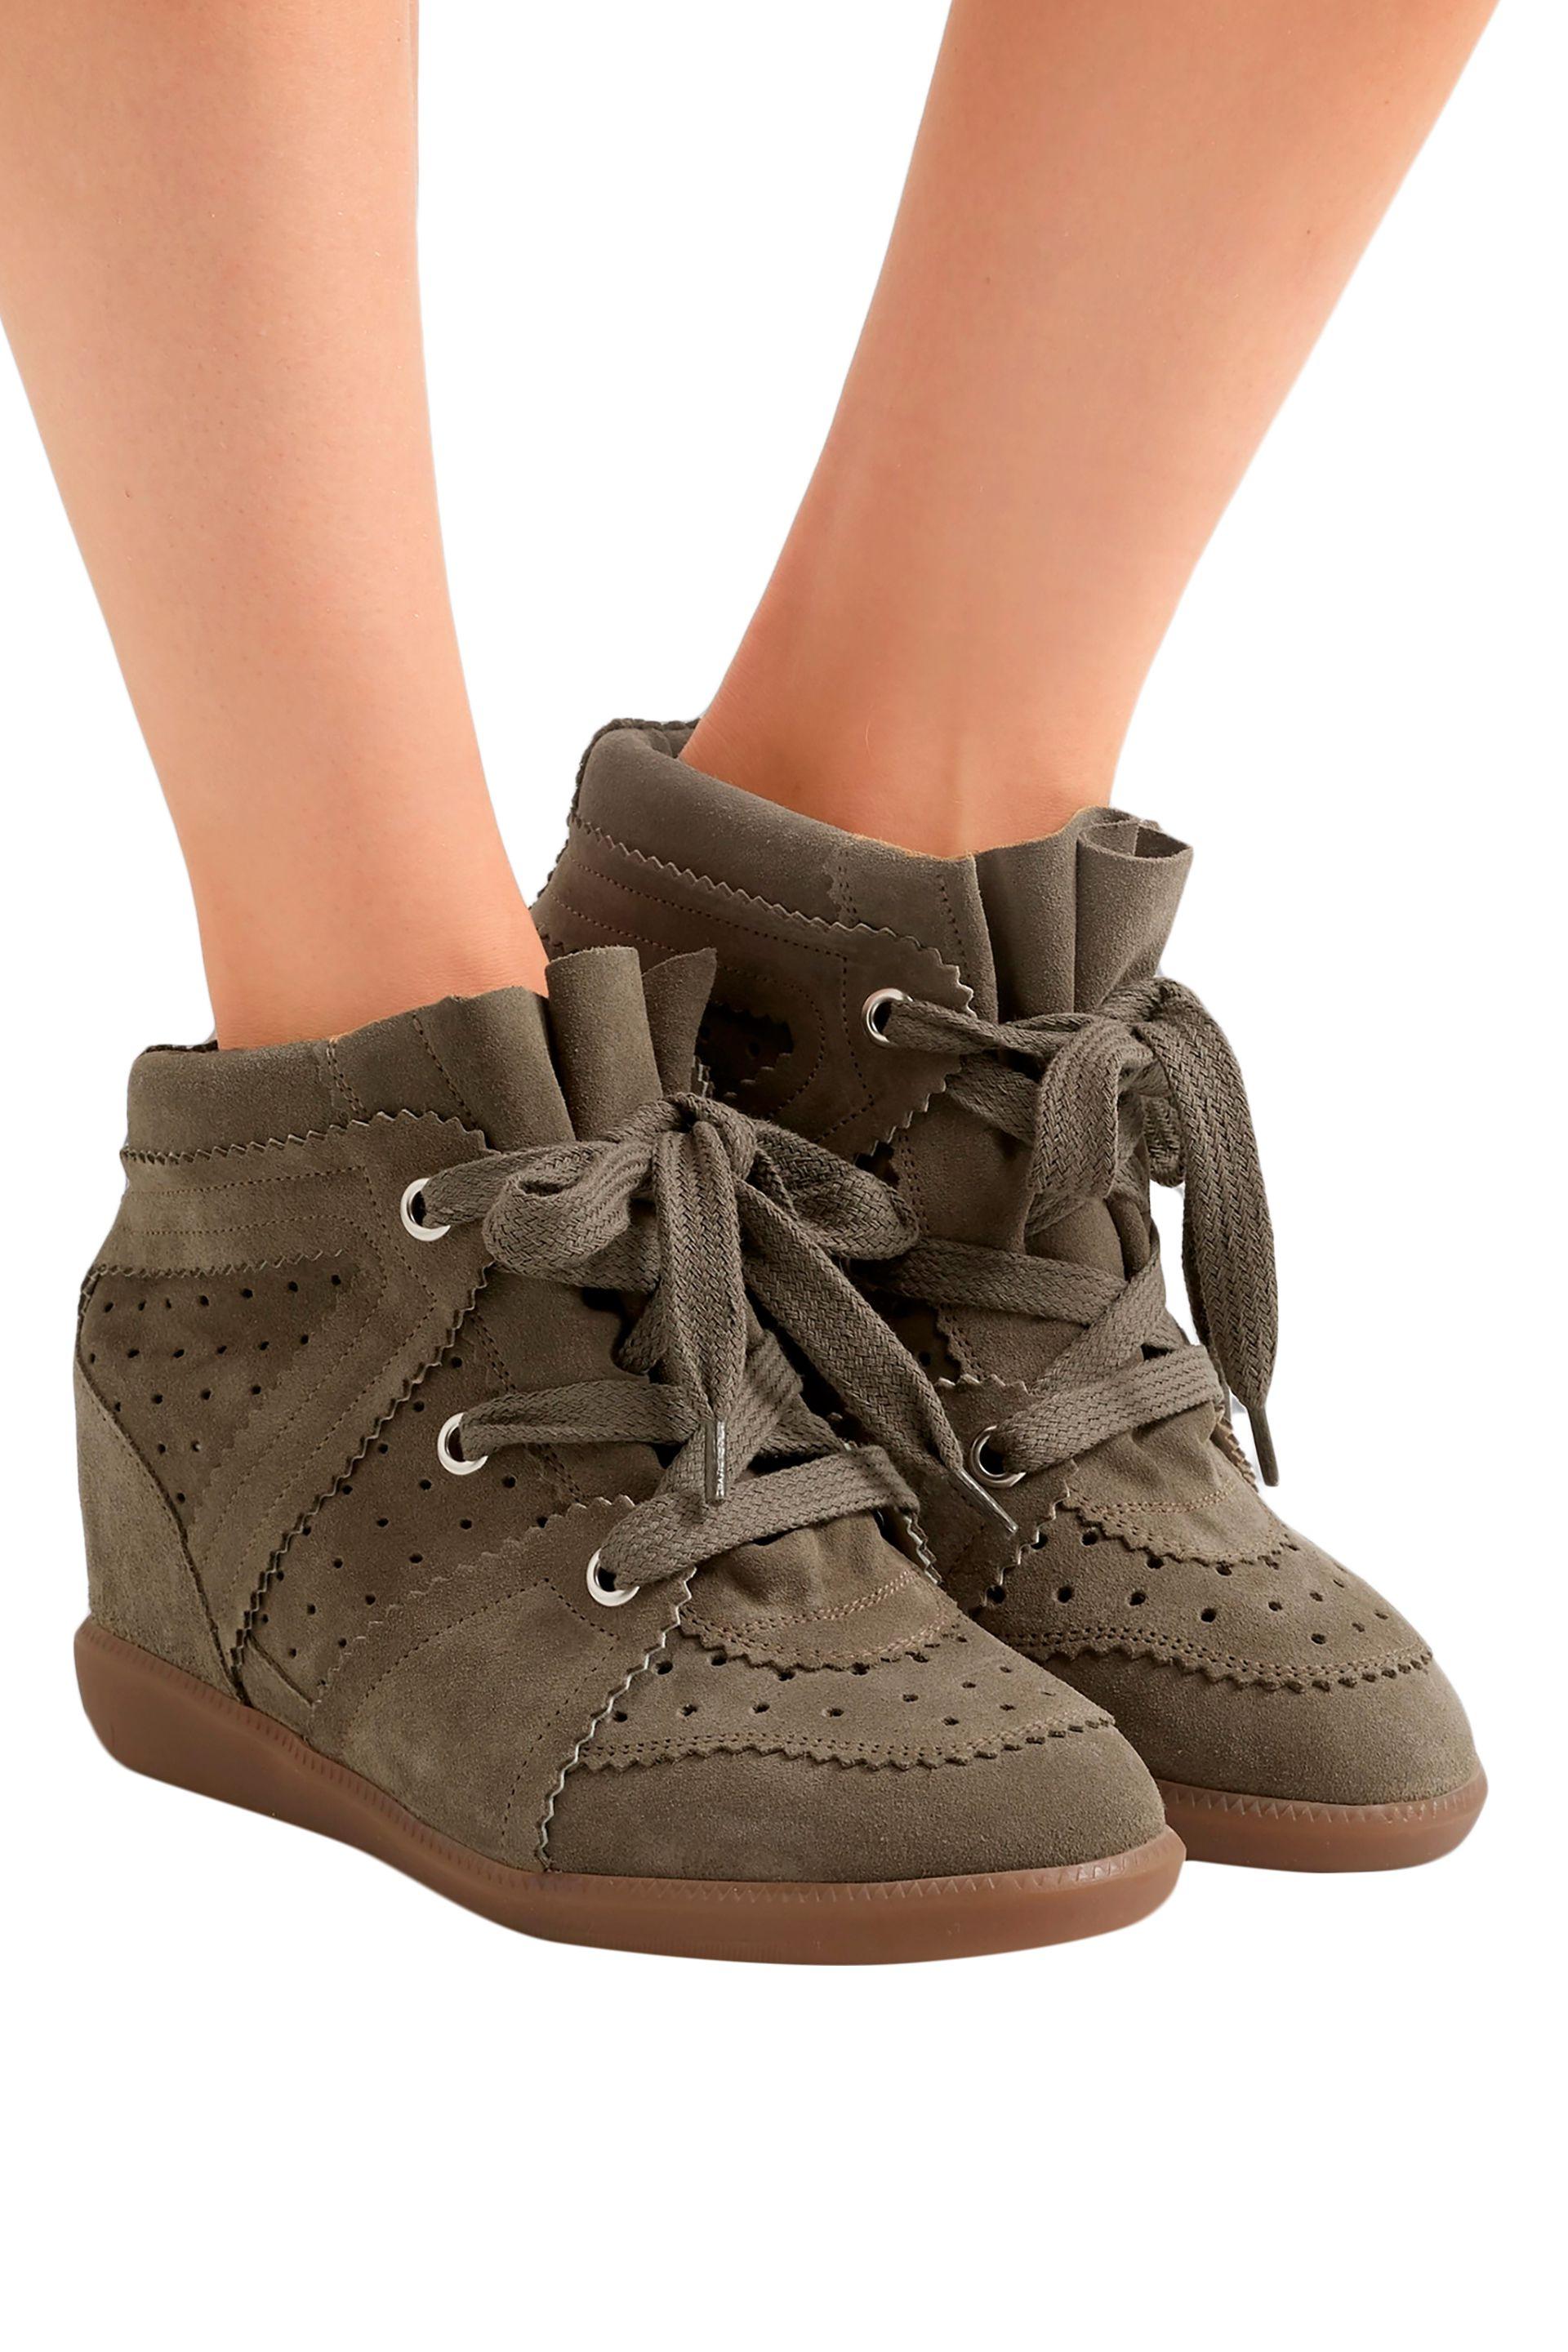 isabel marant wedge sneakers sale,Quality assurance,protein-burger.com